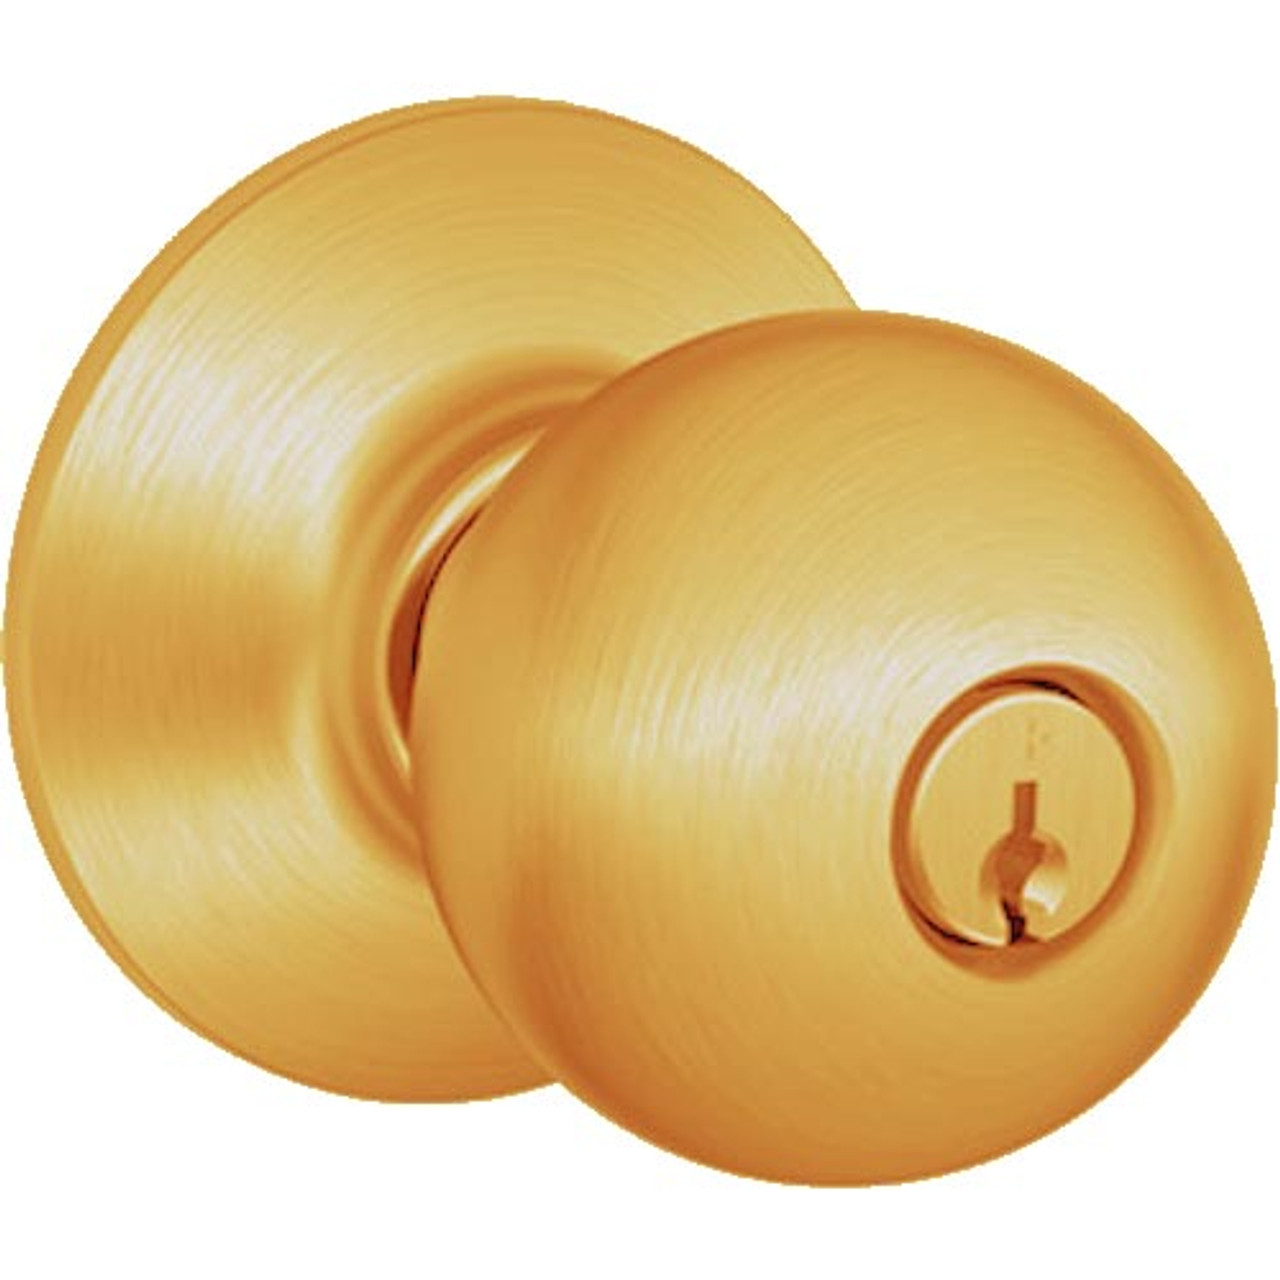 A80PD-ORB-612 Schlage Orbit Commercial Cylindrical Lock in Satin Bronze